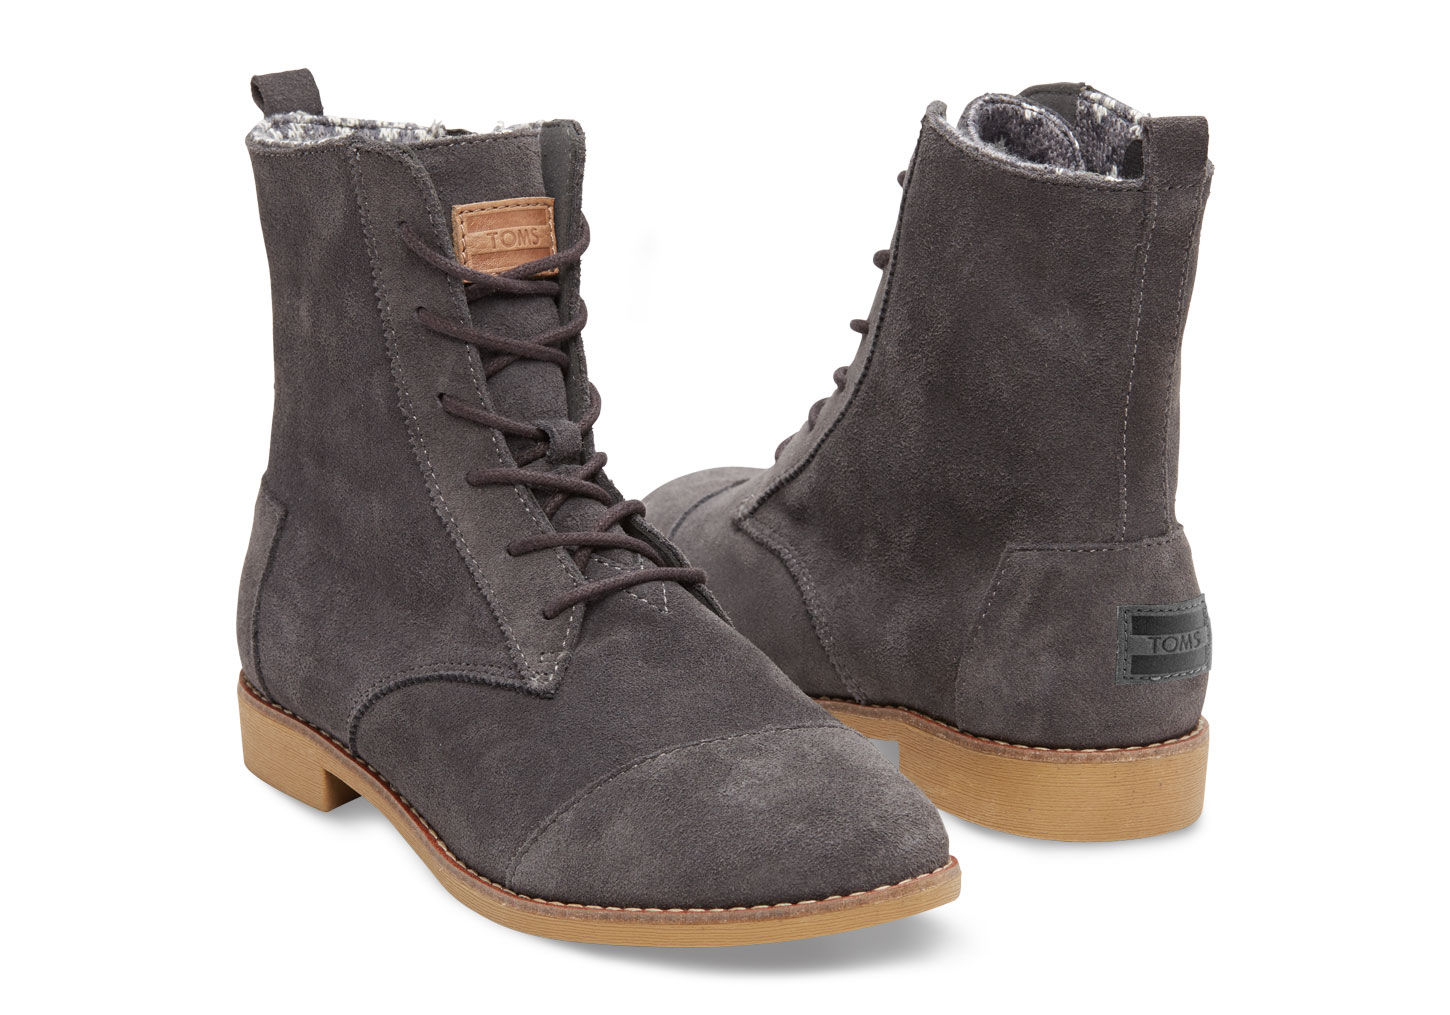 toms gray boots